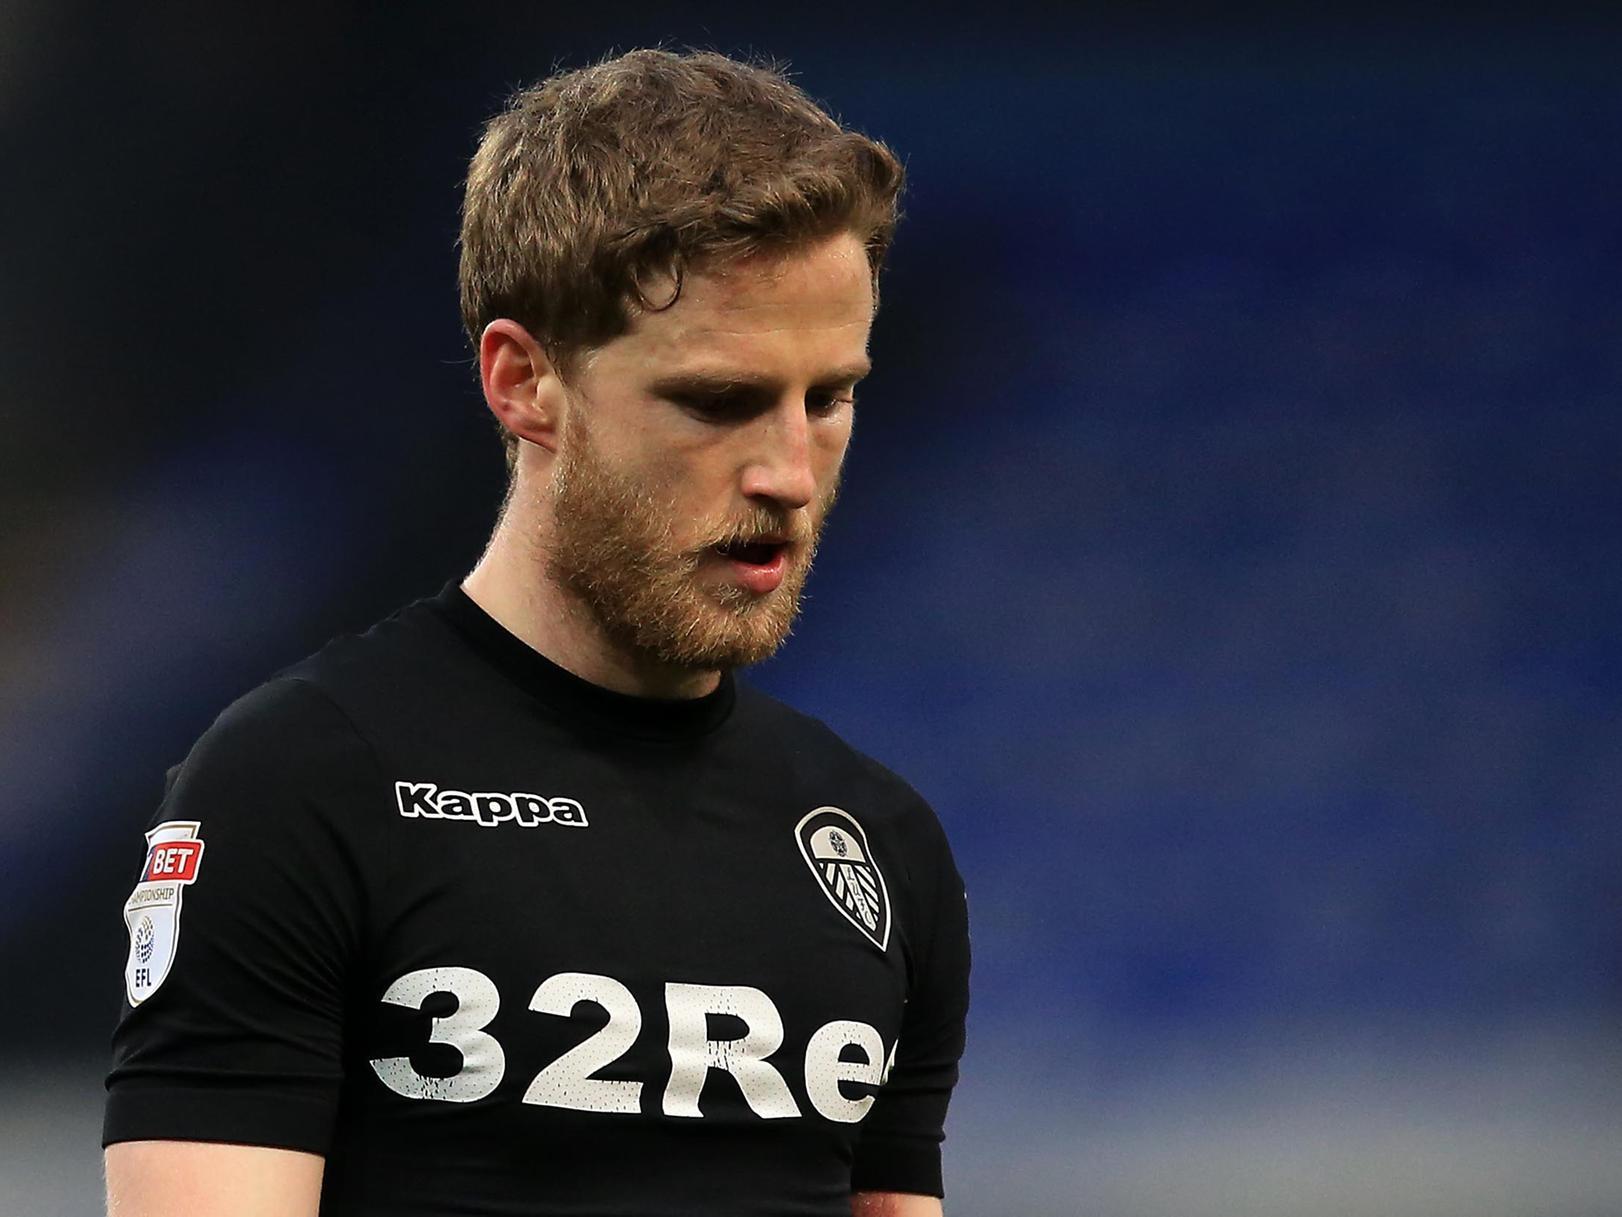 Luton Town man Eunan OKane is unlikely to ever return to Leeds United after sealing an 18-month loan deal. (Football Insider)